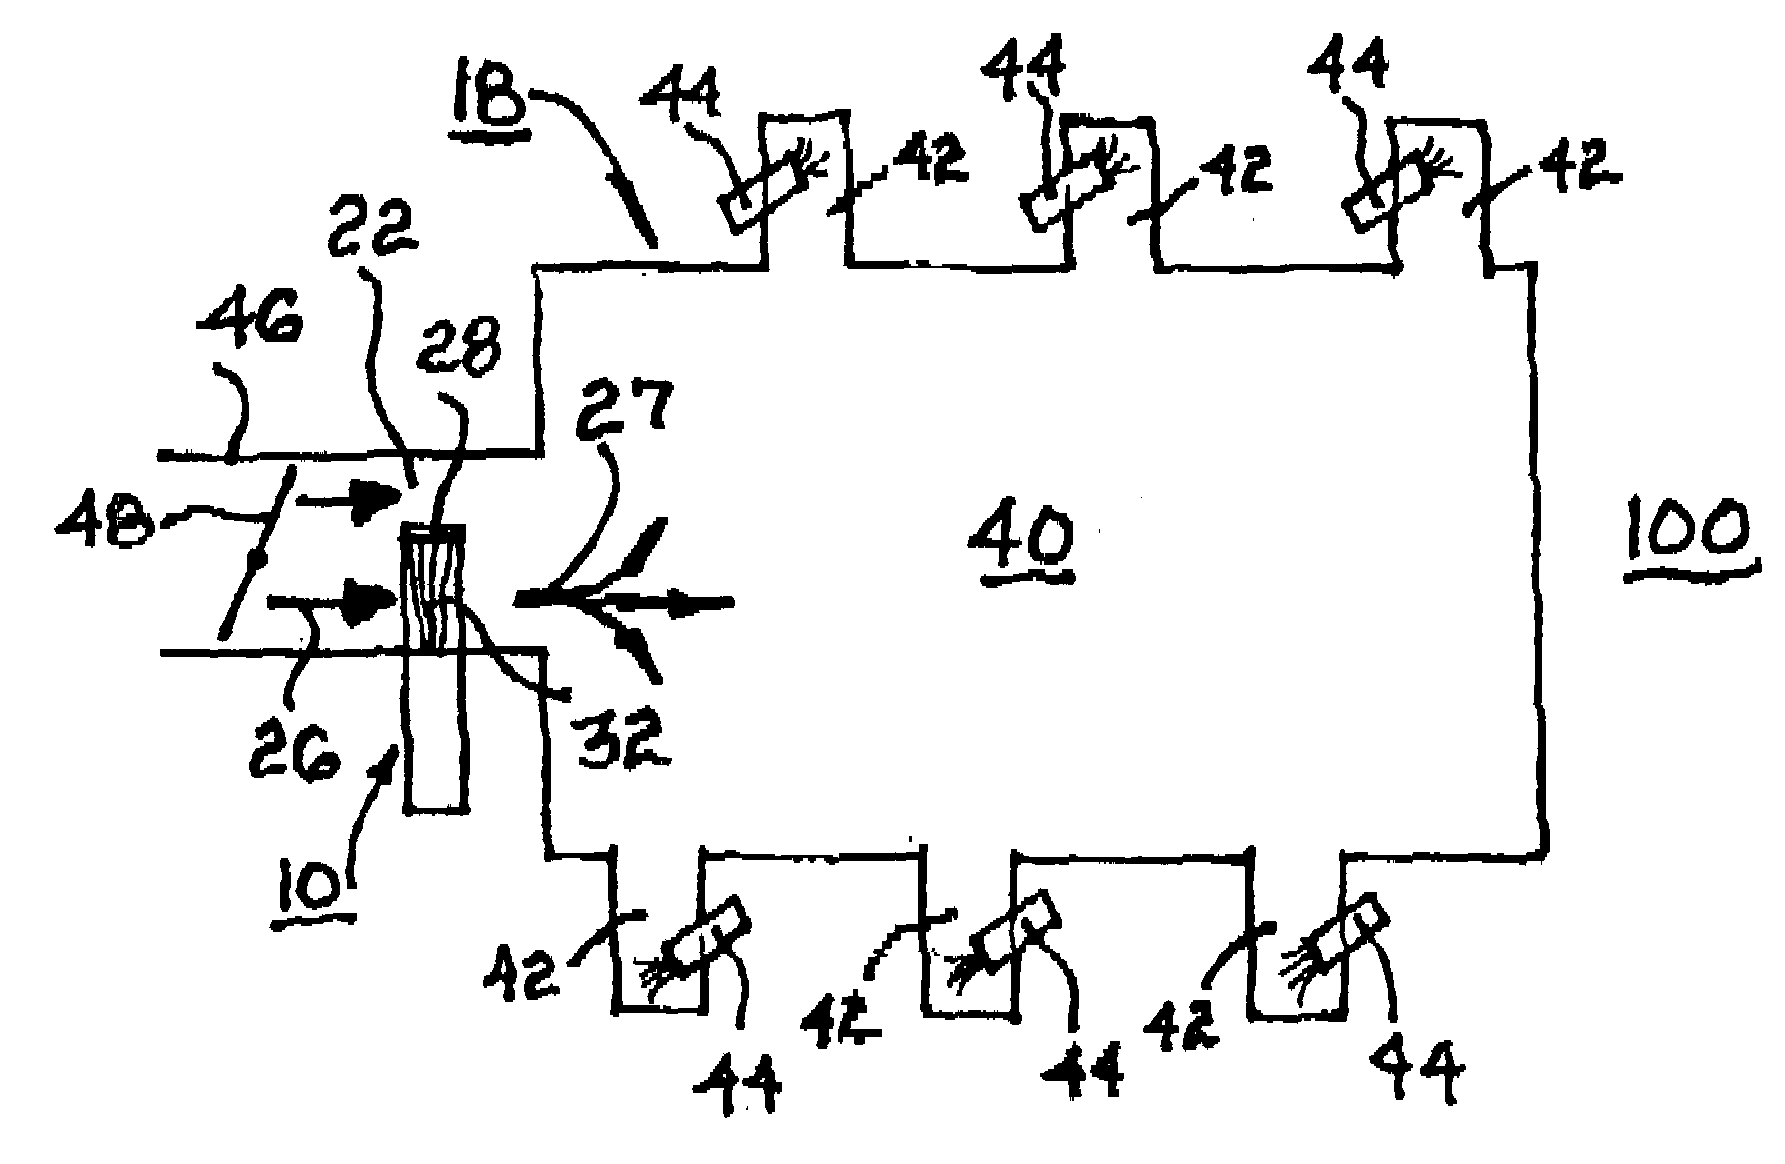 Fuel vapor generator for enhanced cold starting of an internal combustion engine